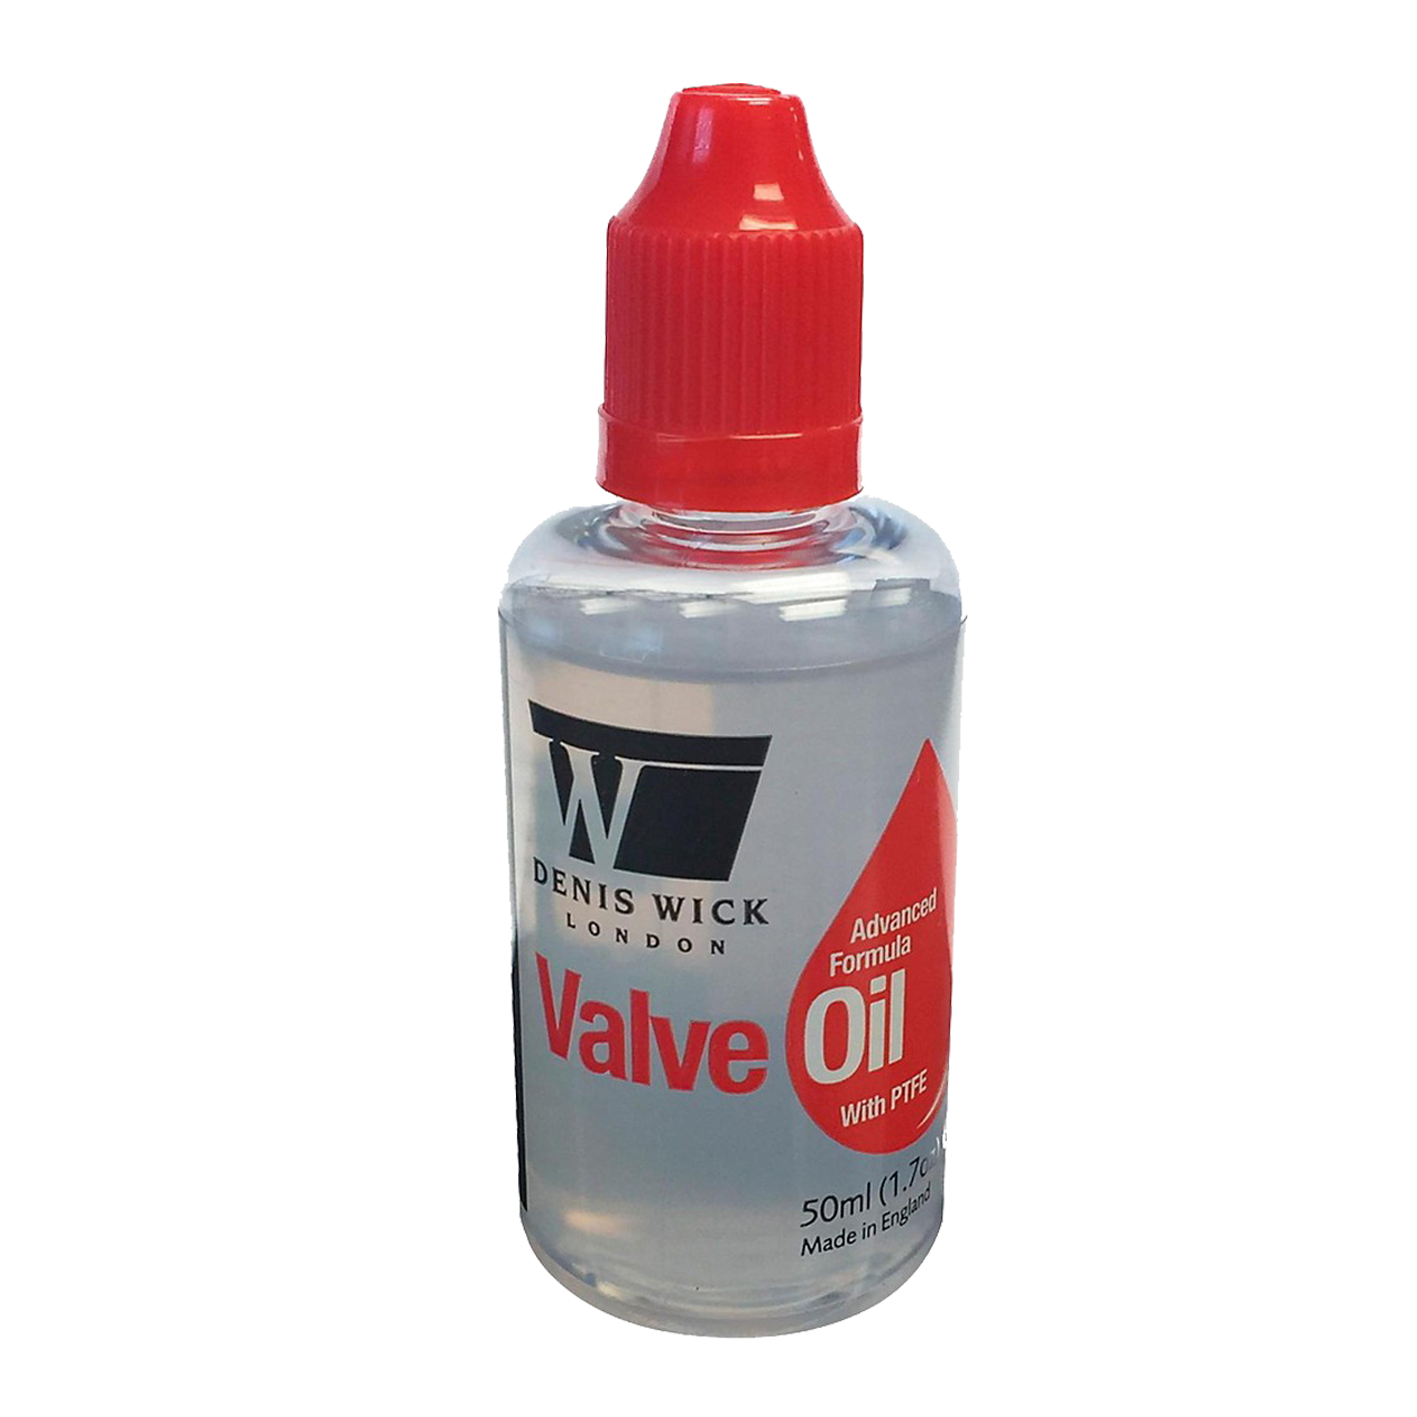 Denis Wick - Denis Wick Advanced Formula Valve Oil with PTFE-Accessories-Denis Wick-Music Elements